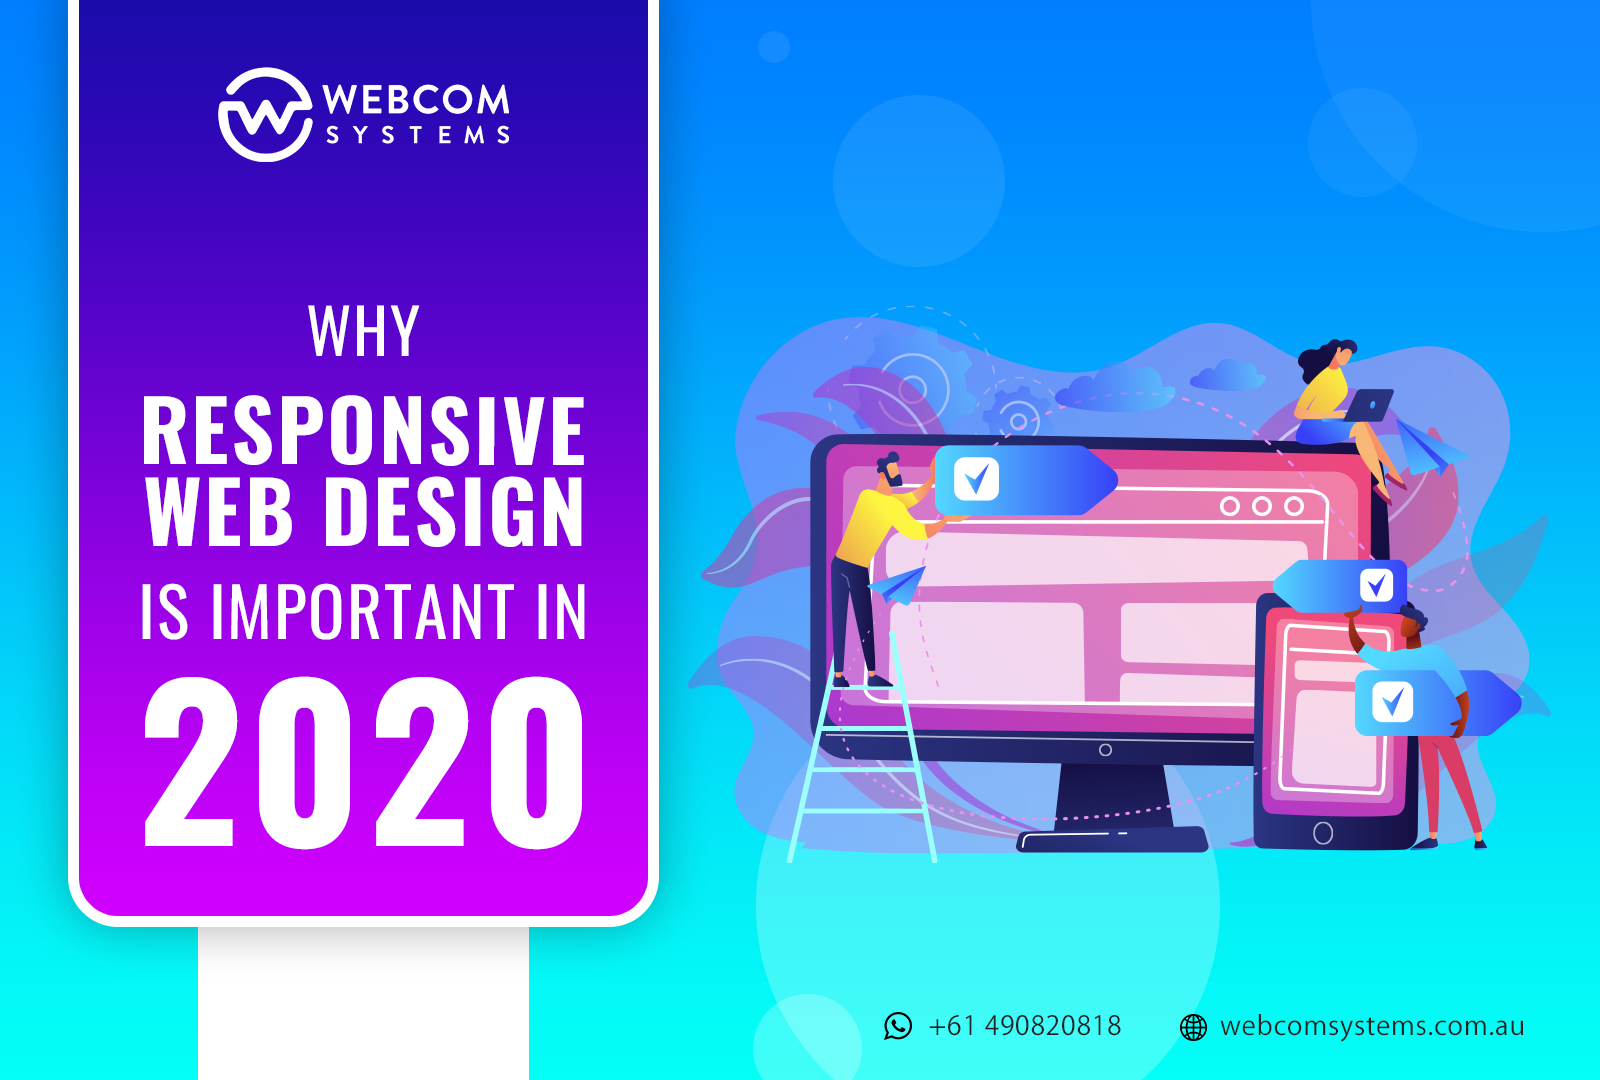 Why Responsive Web Design is Important in 2020